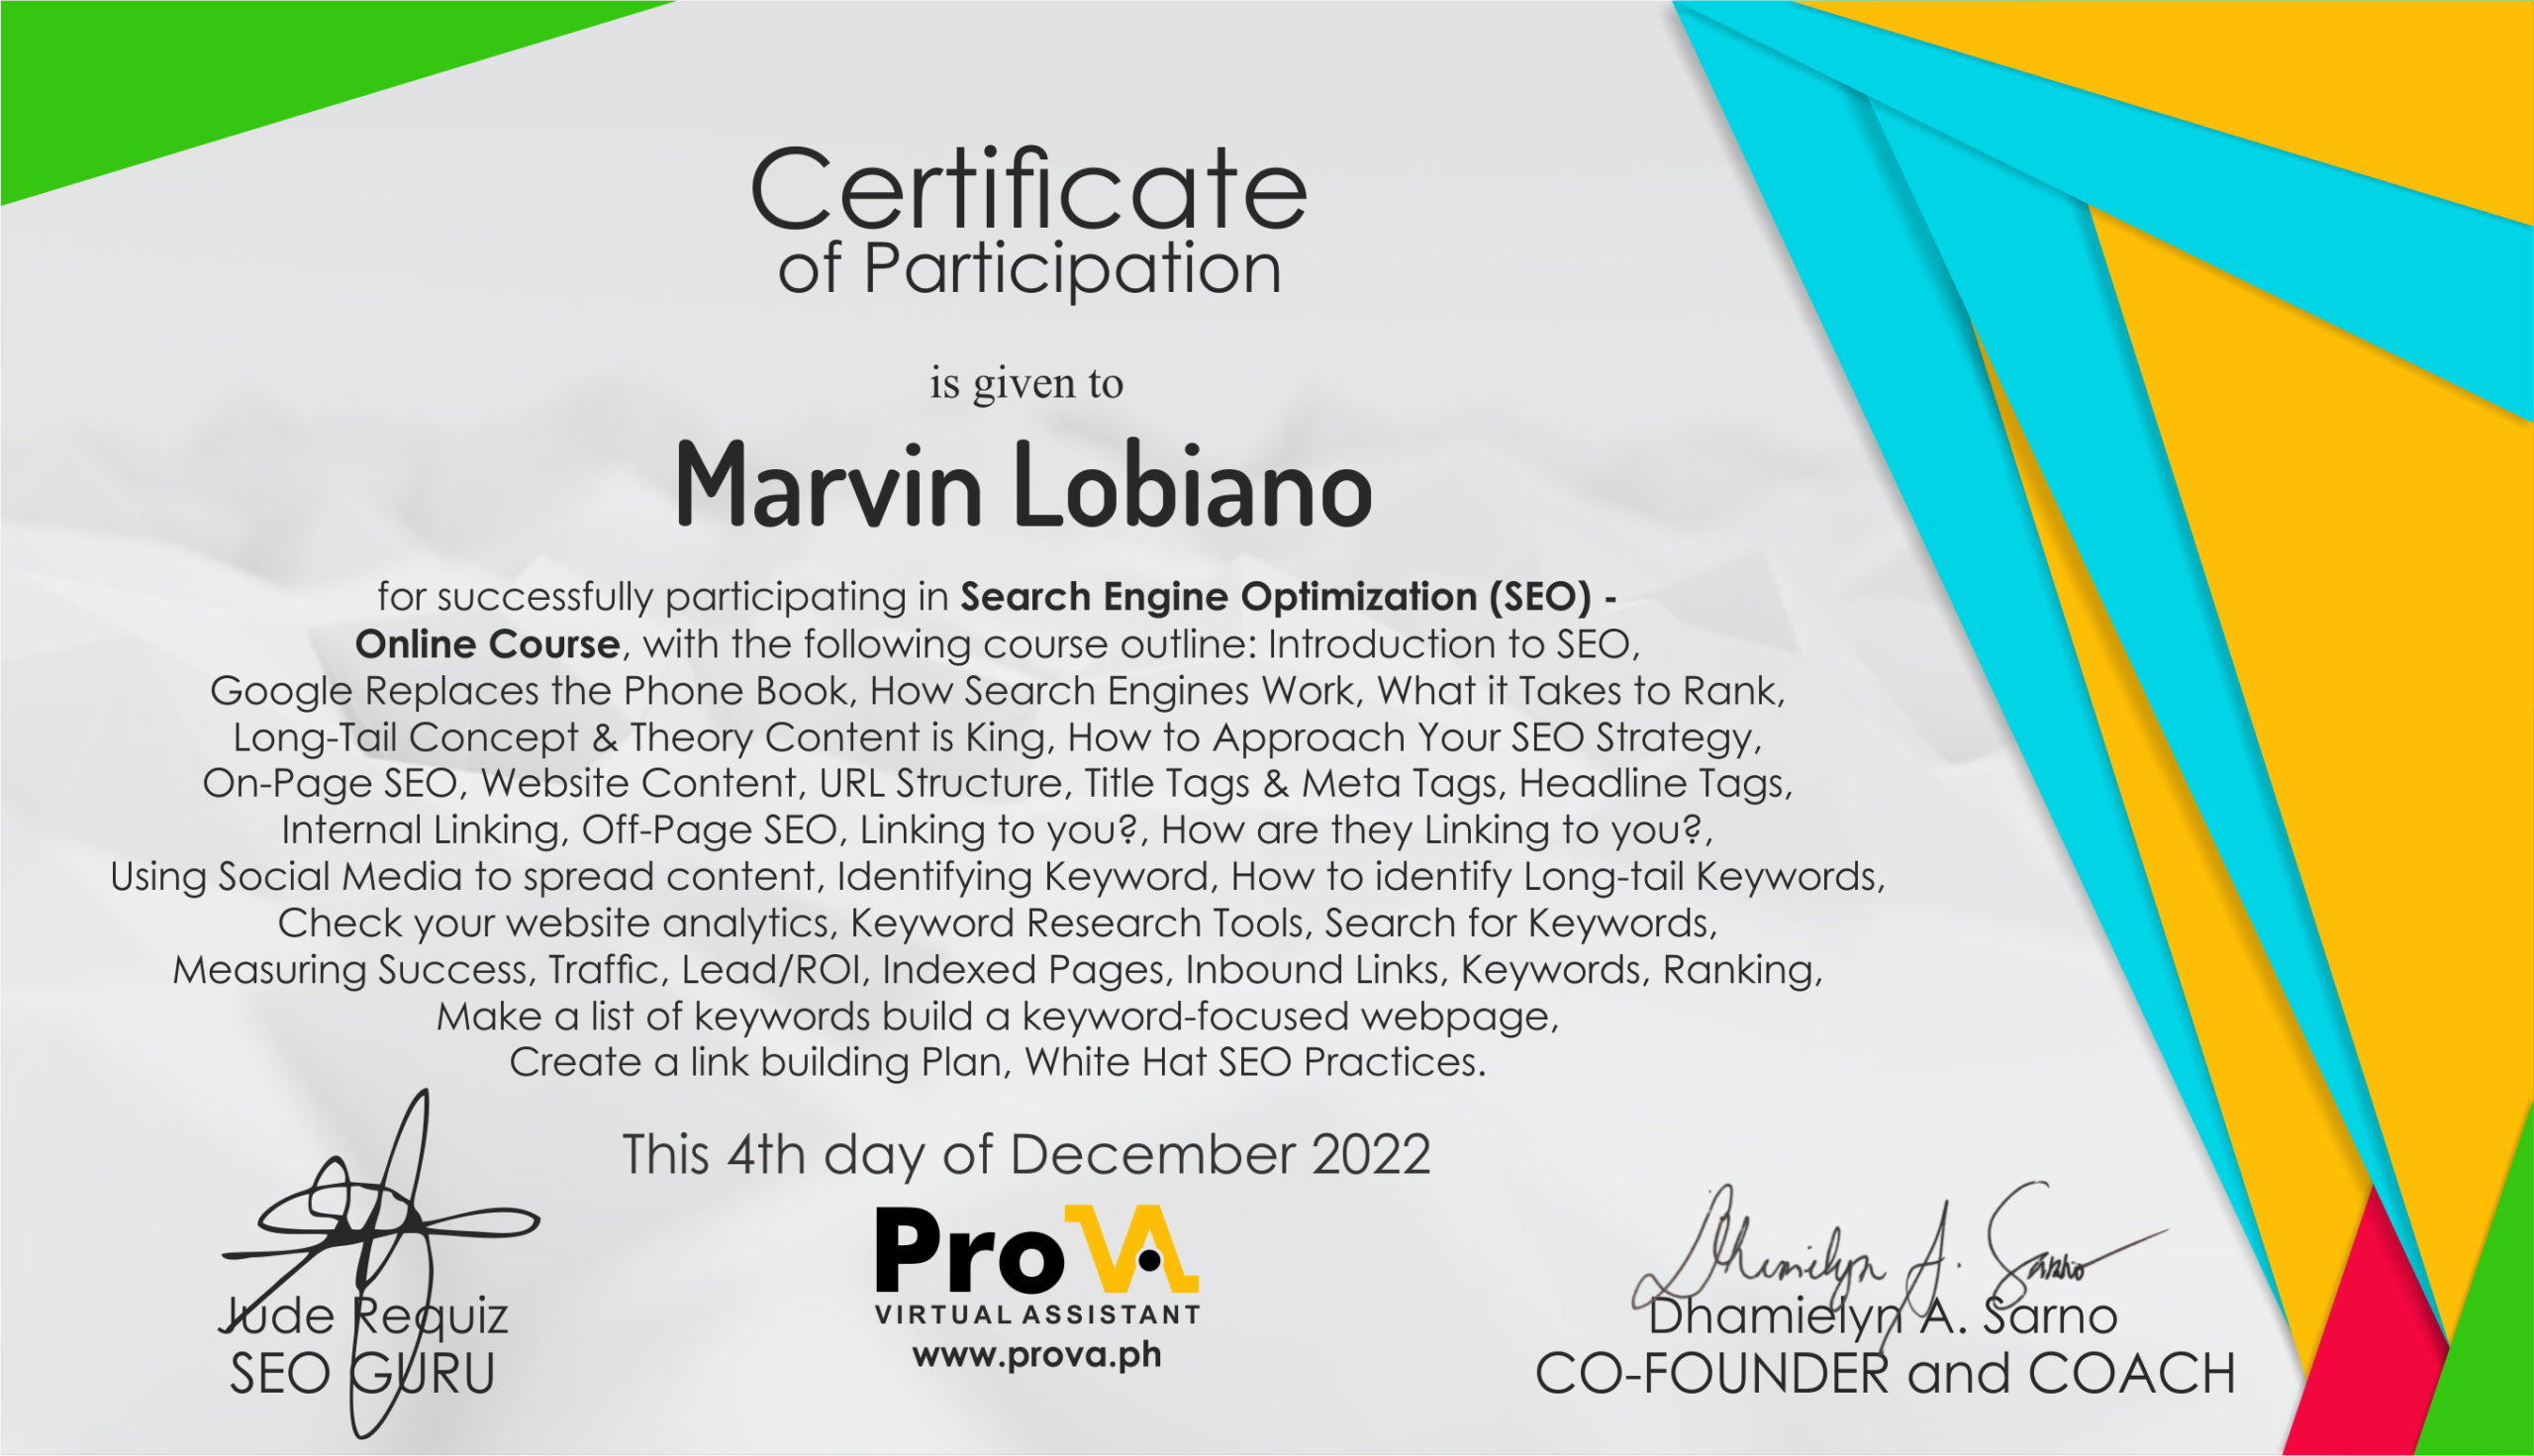 Marvin Lobiano has a Local SEO Certificate